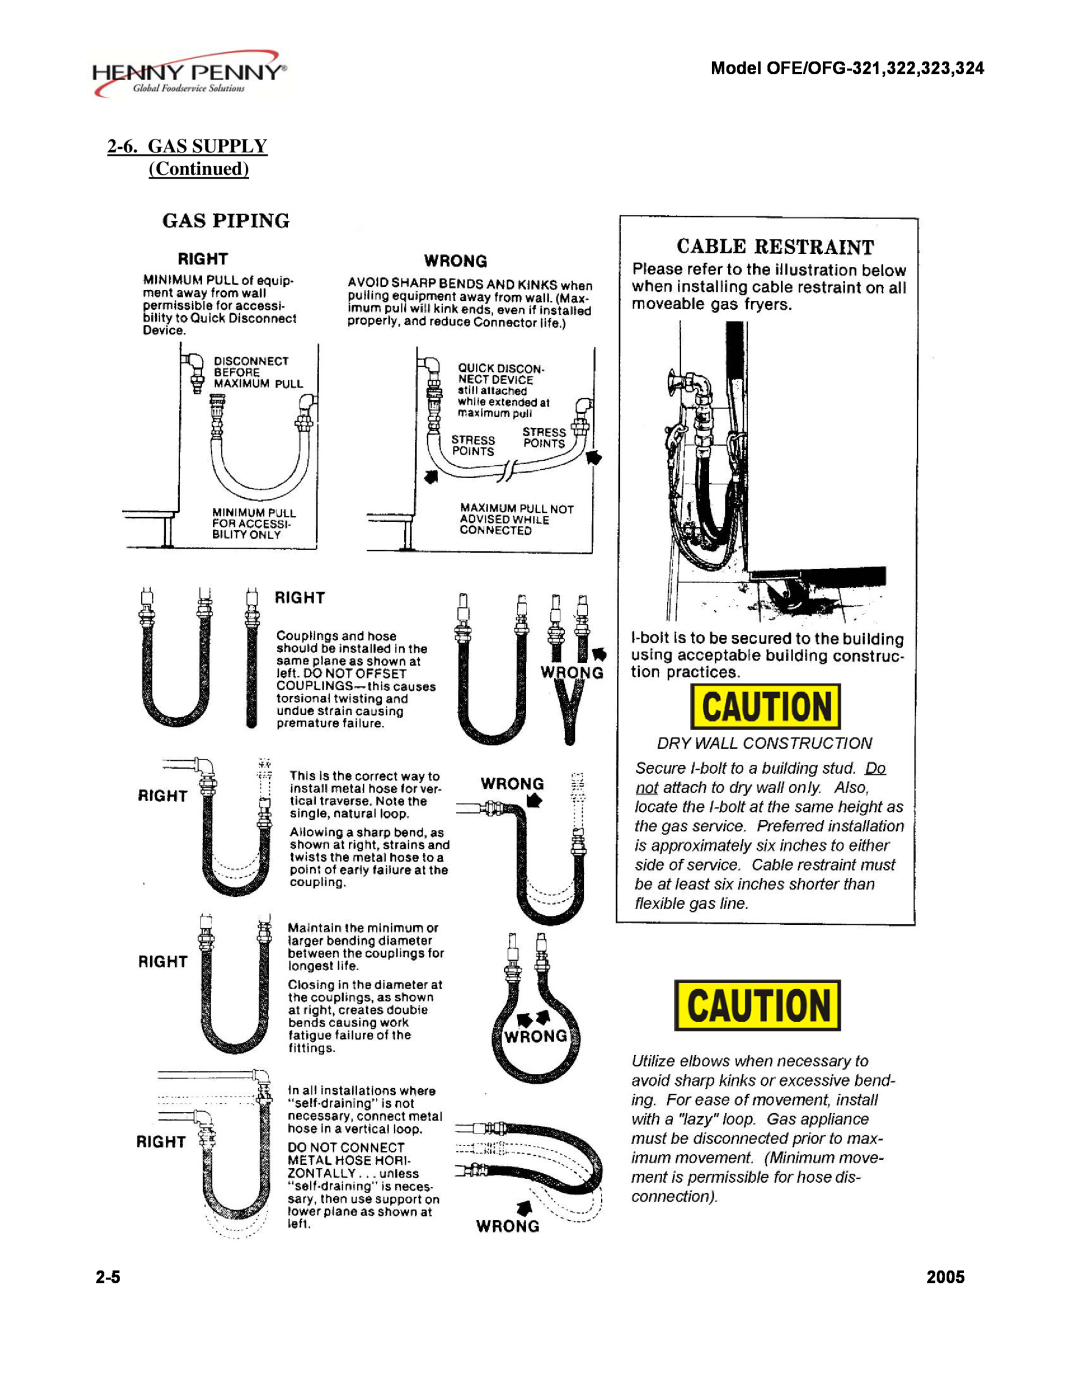 Henny Penny installation instructions GAS SUPPLY Continued, Model OFE/OFG-321,322,323,324, 2005 